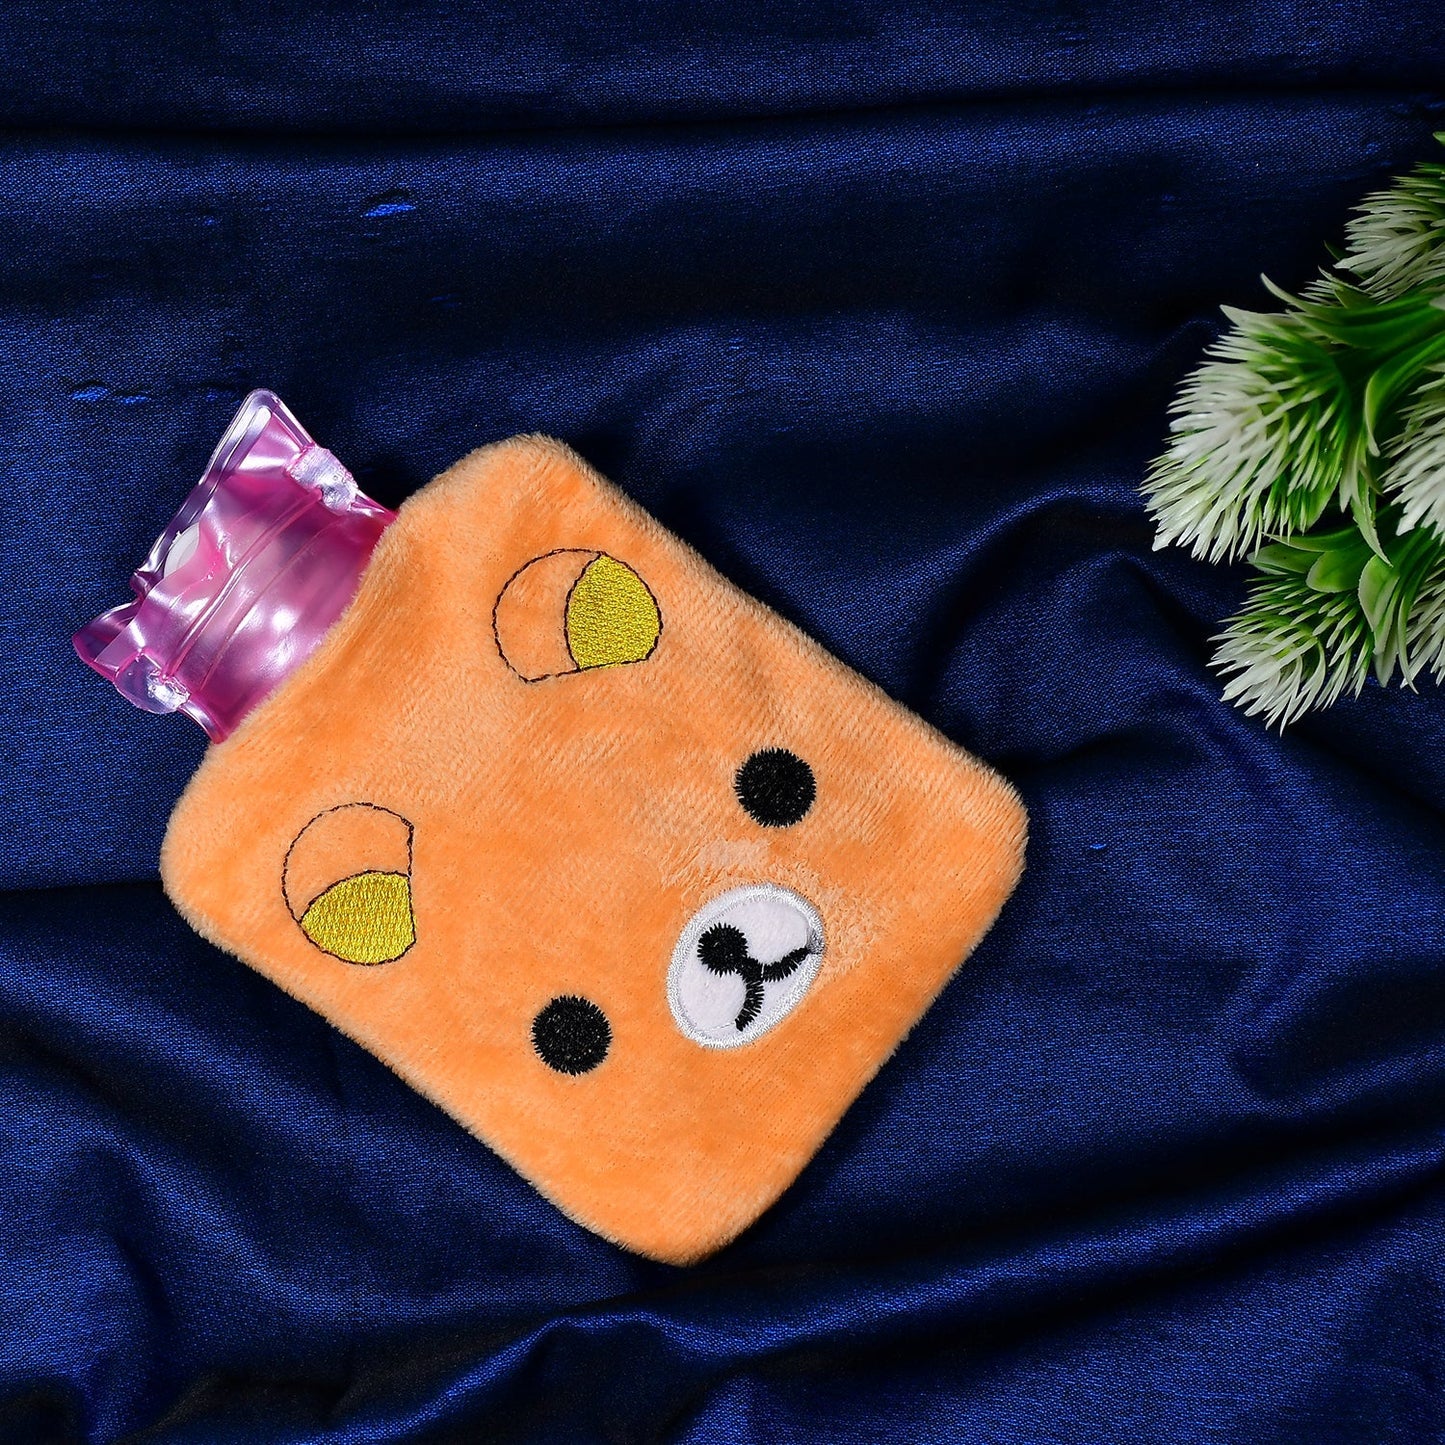 Orange Panda small Hot Water Bag with Cover for Pain Relief, Neck, Shoulder Pain and Hand, Feet Warmer, Menstrual Cramps